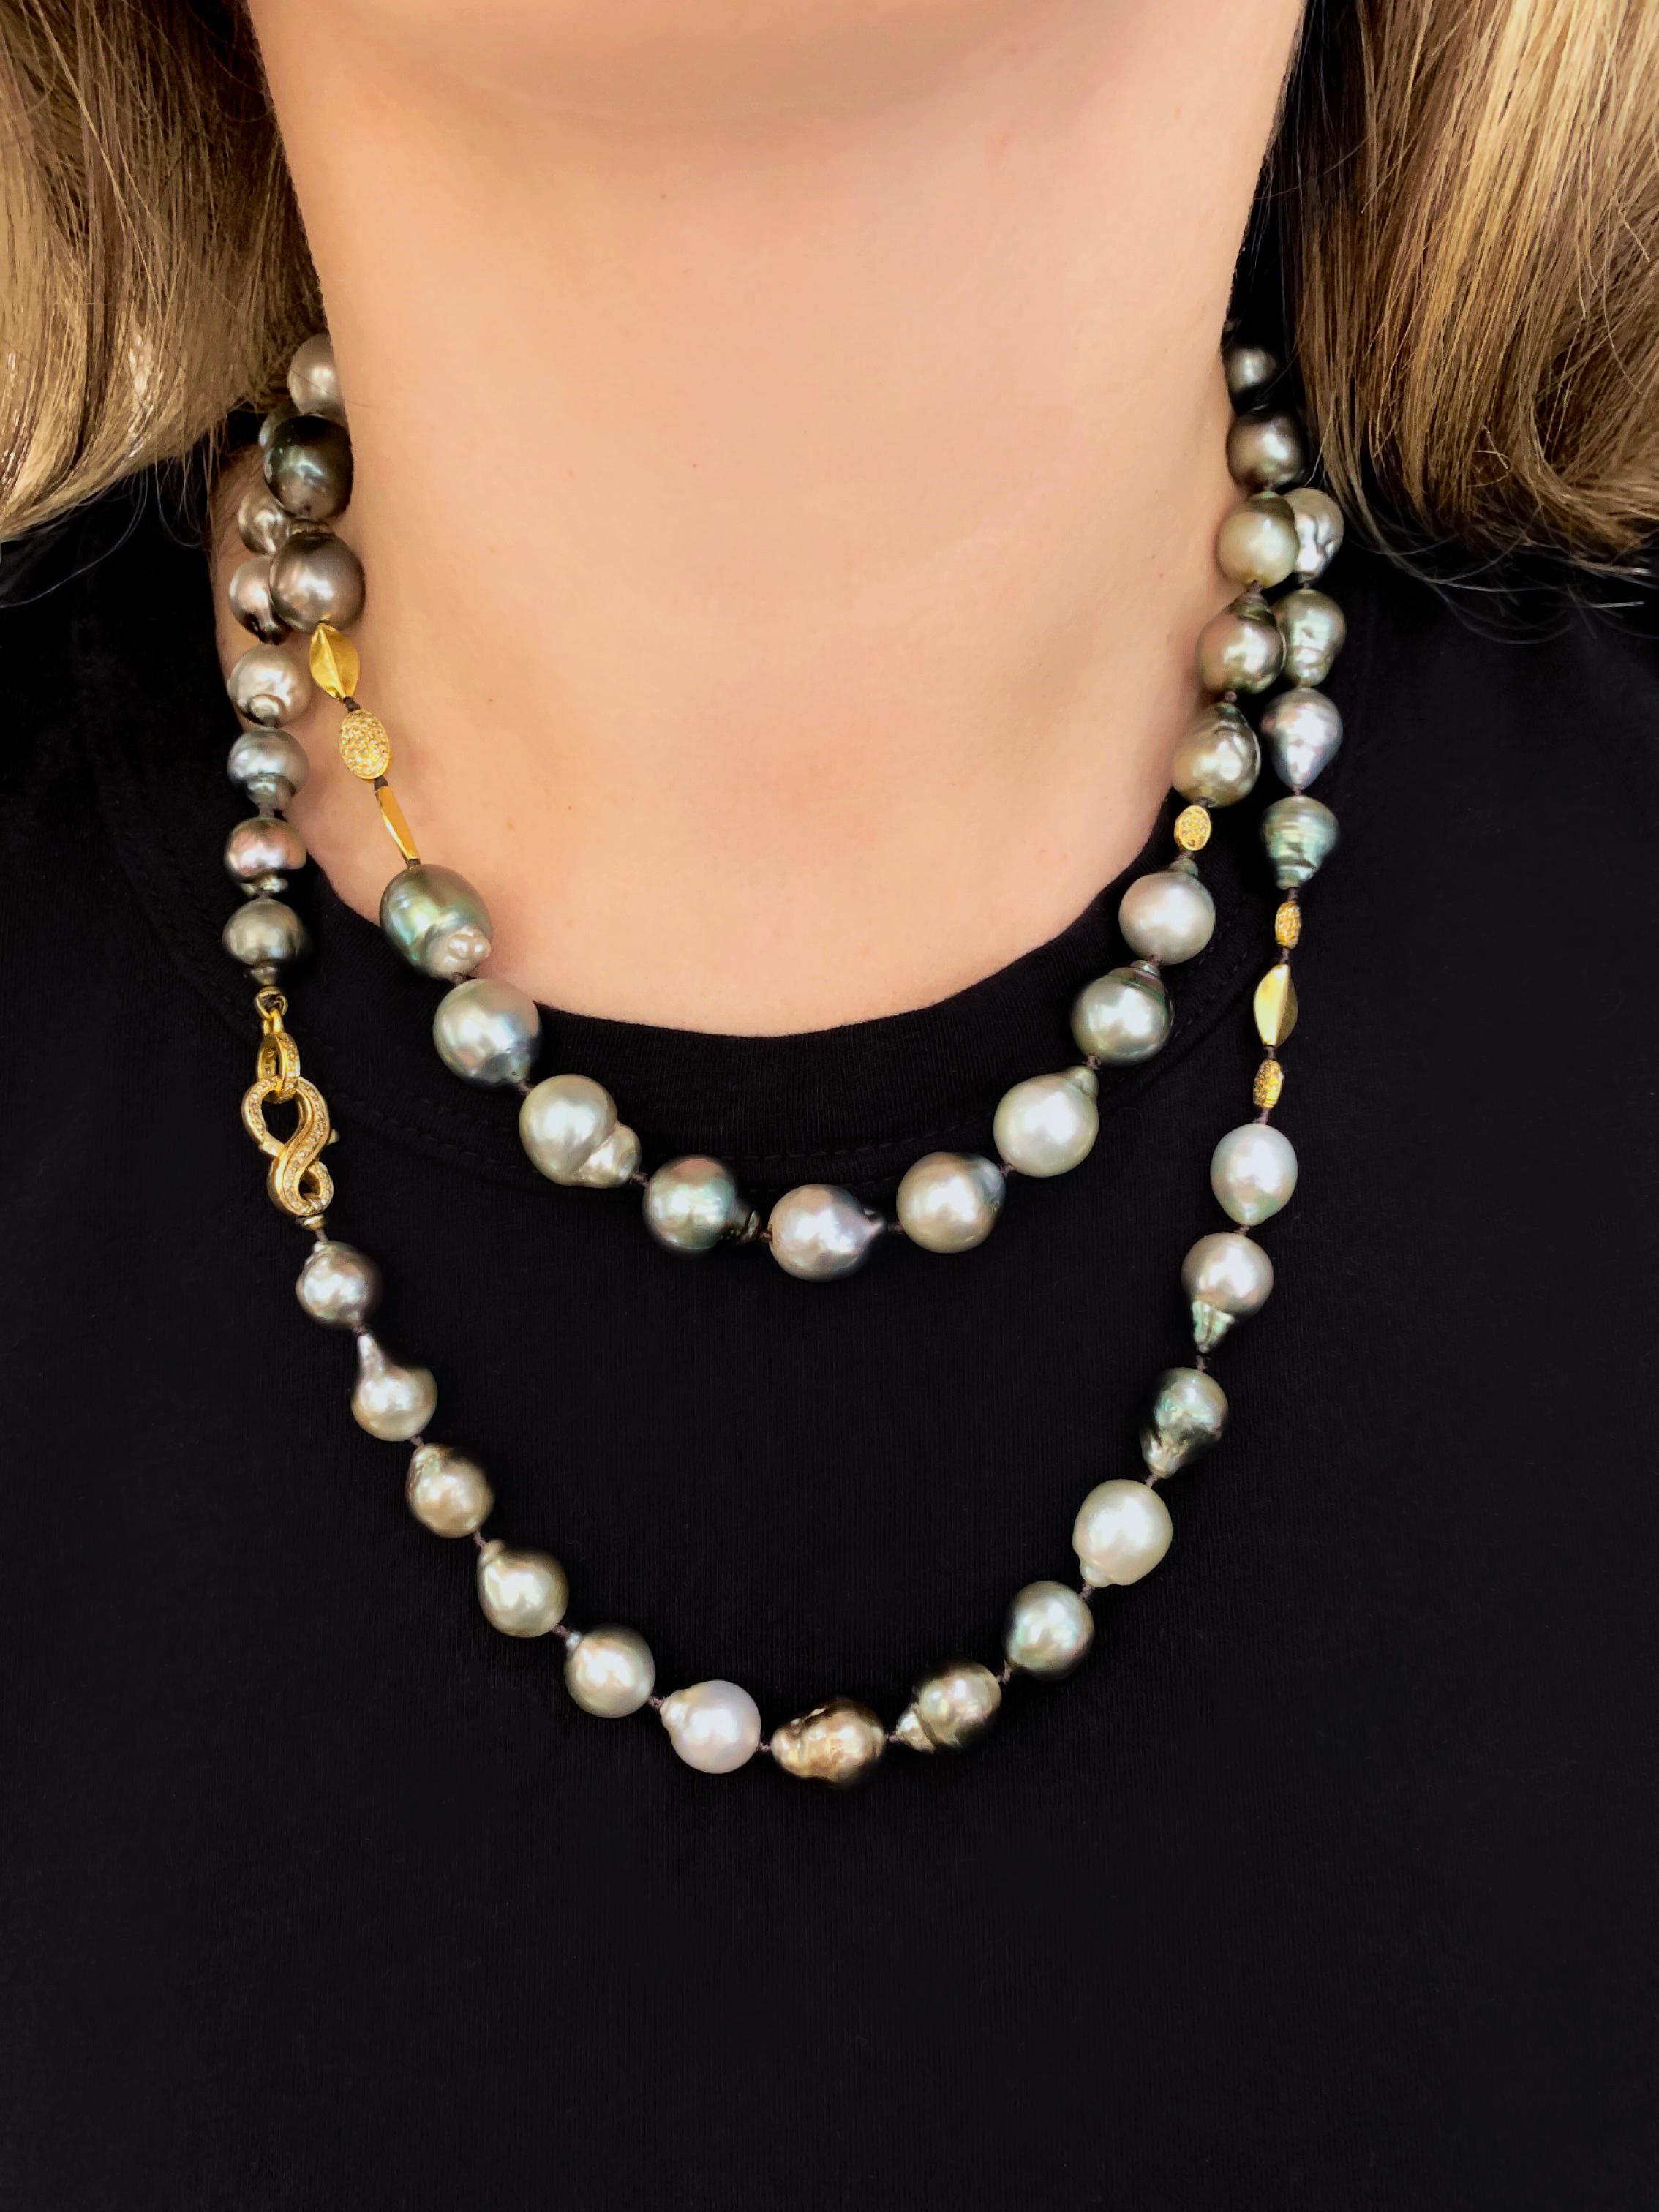 Long Tahitian Baroque Pearl Necklace handmade by jewelry designer Julie Romanenko (Just Jules) featuring an assortment of gorgeous silvery Tahitian baroque pearls with beautiful iridescence, adorned with shimmering pave diamond and solid 14k yellow